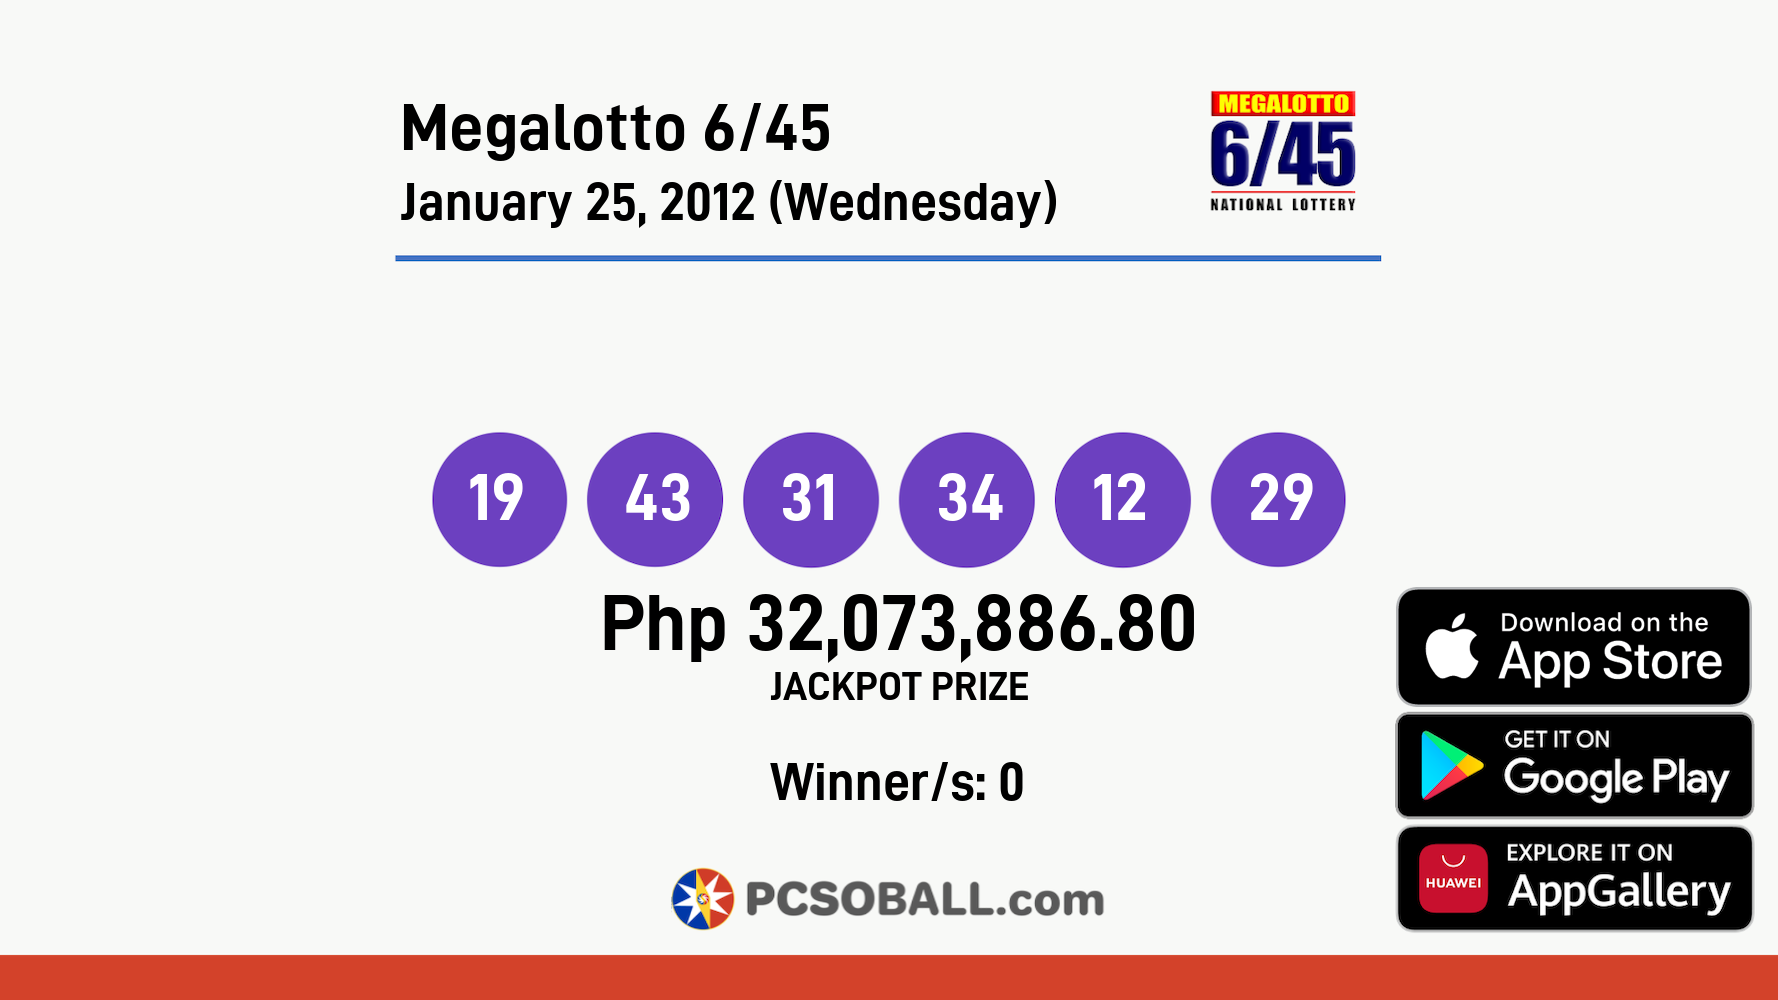 Megalotto 6/45 January 25, 2012 (Wednesday) Result